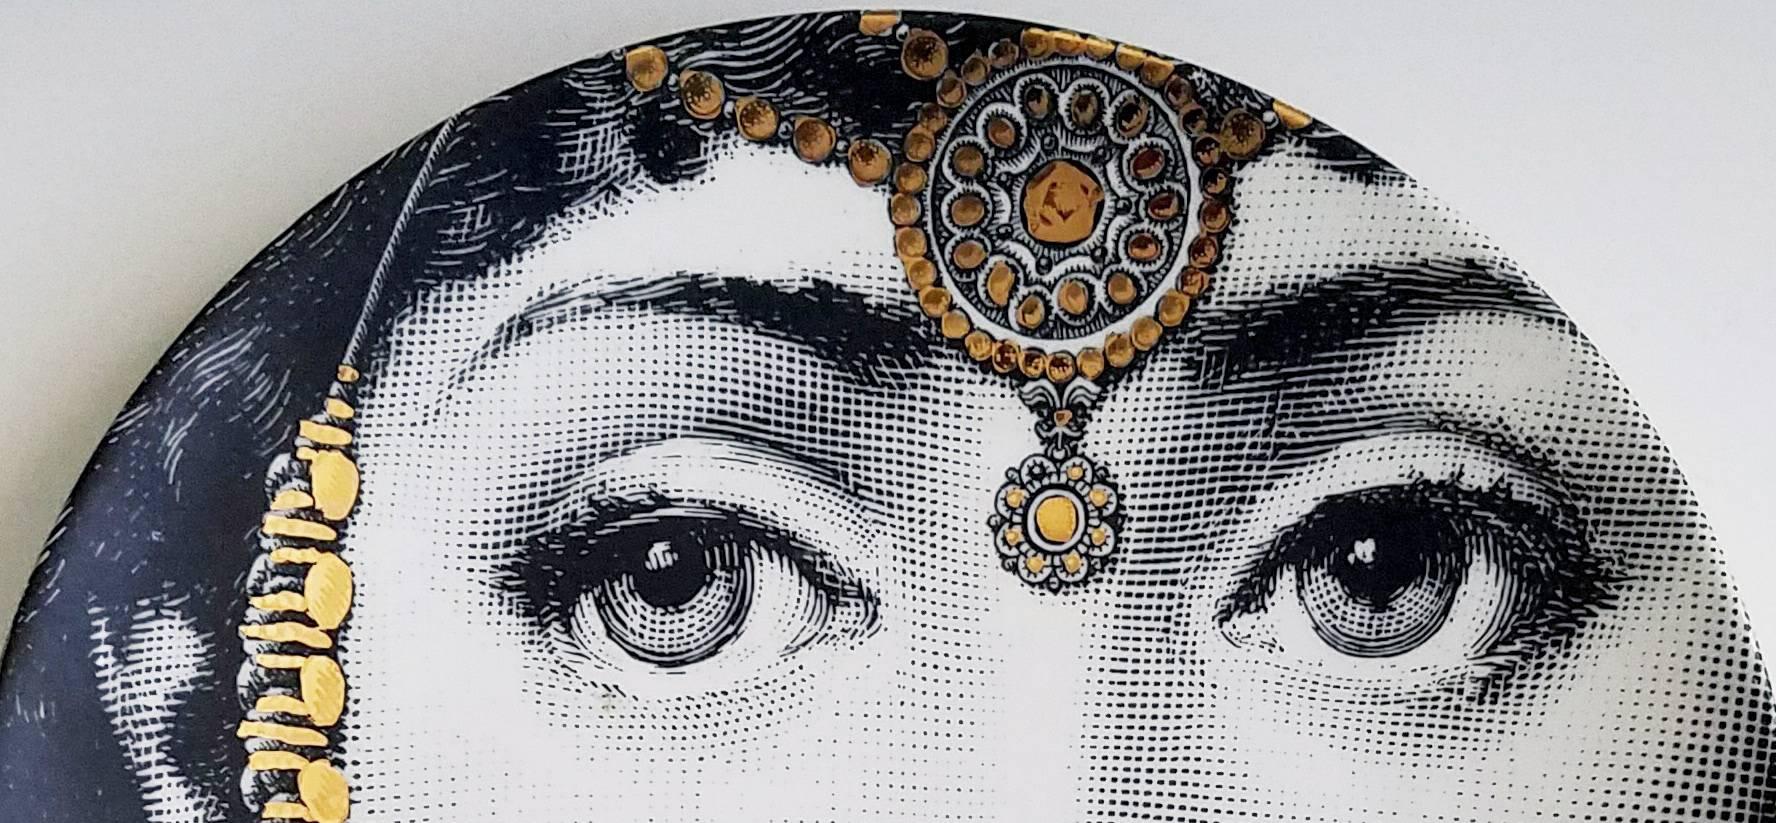 Fornasetti Tema E variazioni gold-plate, Number 228, Image of Lina Cavalieri.

A variation of Fornasetti's Tema E Variazioni series based on the face of the opera singer Lina Cavalieri.

Piero Fornasetti's most famous work is without a doubt,